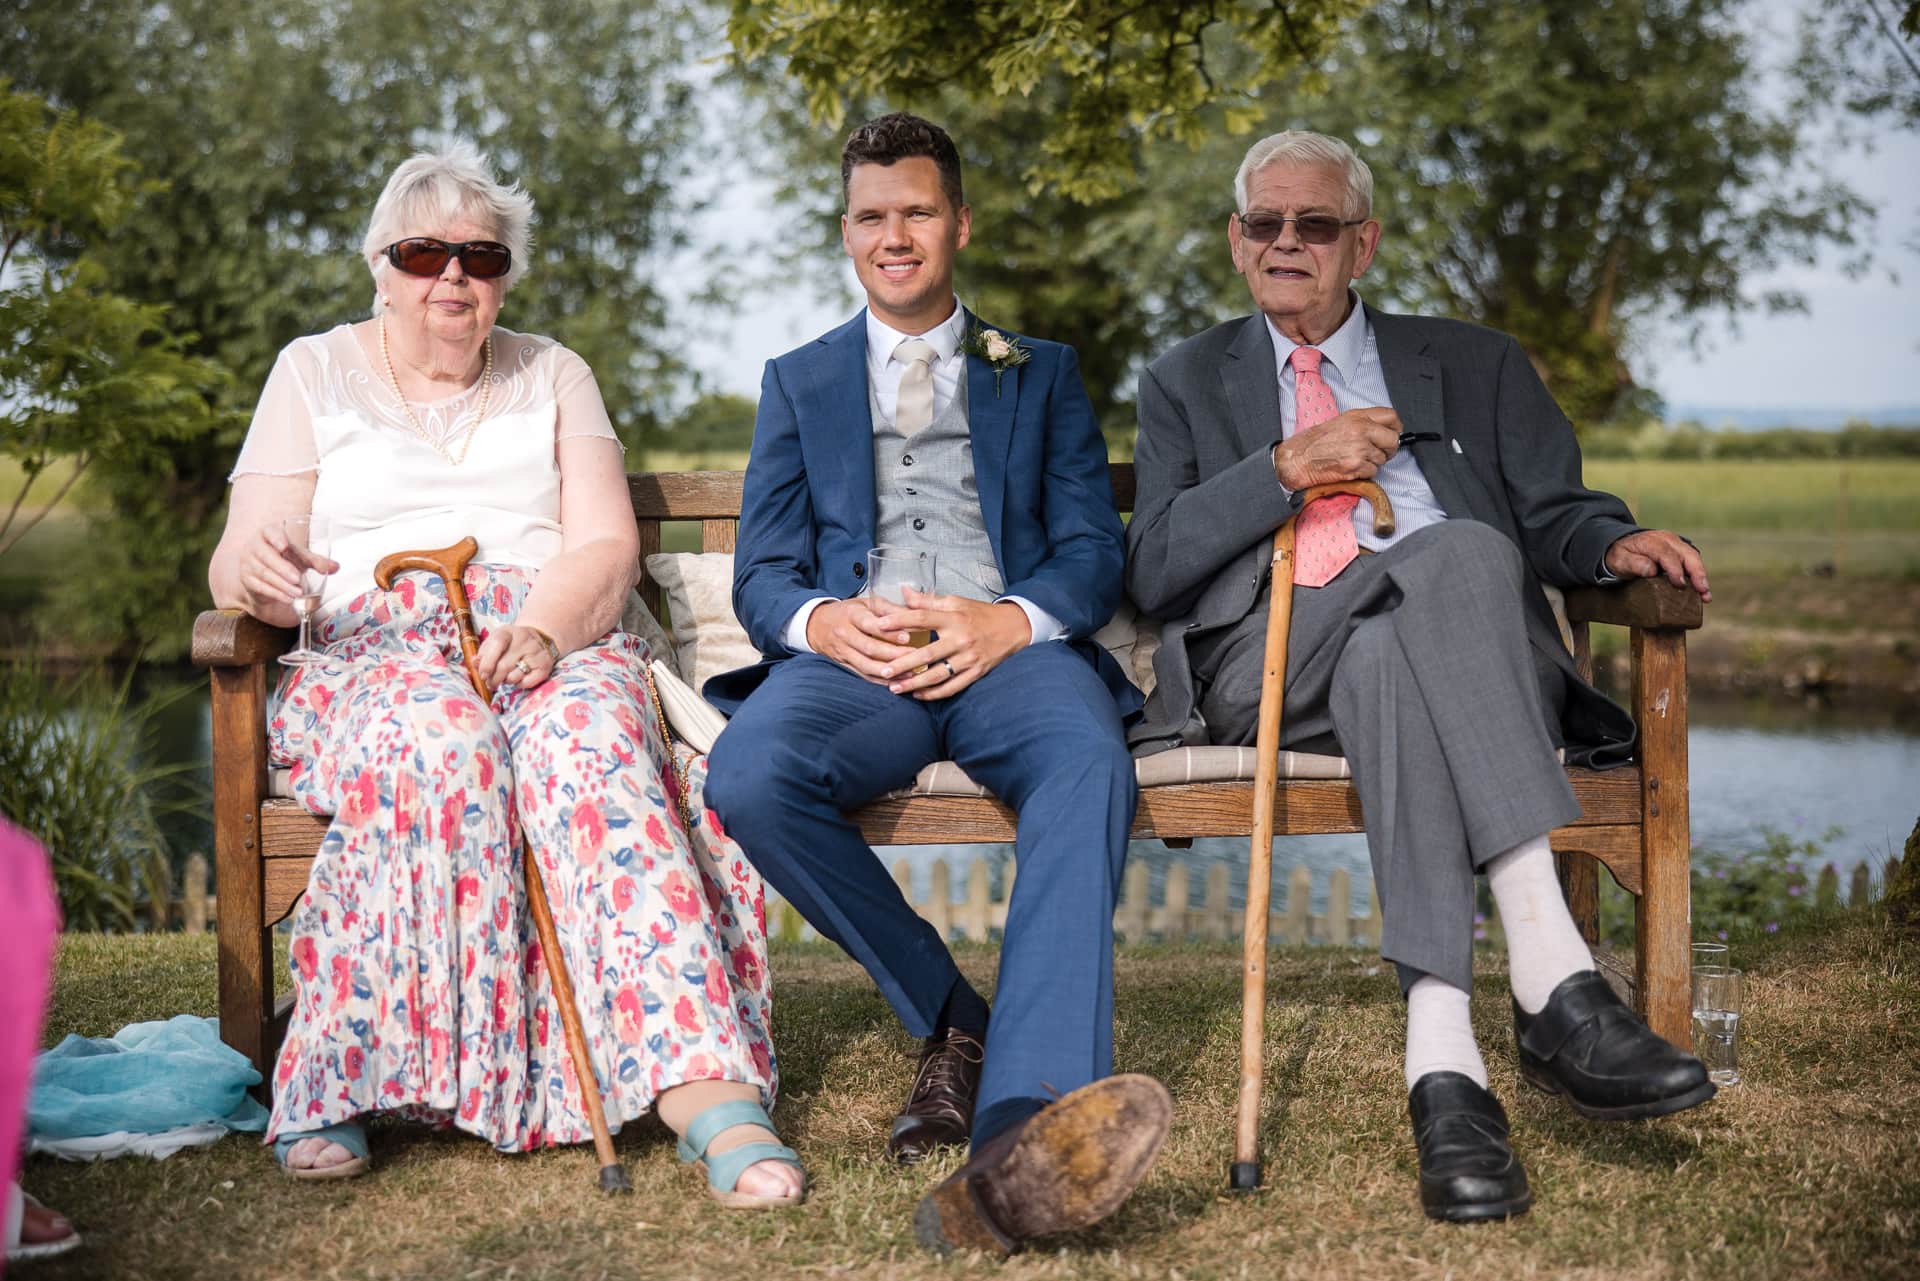 Groom and Grand Parents sat on bench in the garden during the Sandhurst Farm Wedding Reception